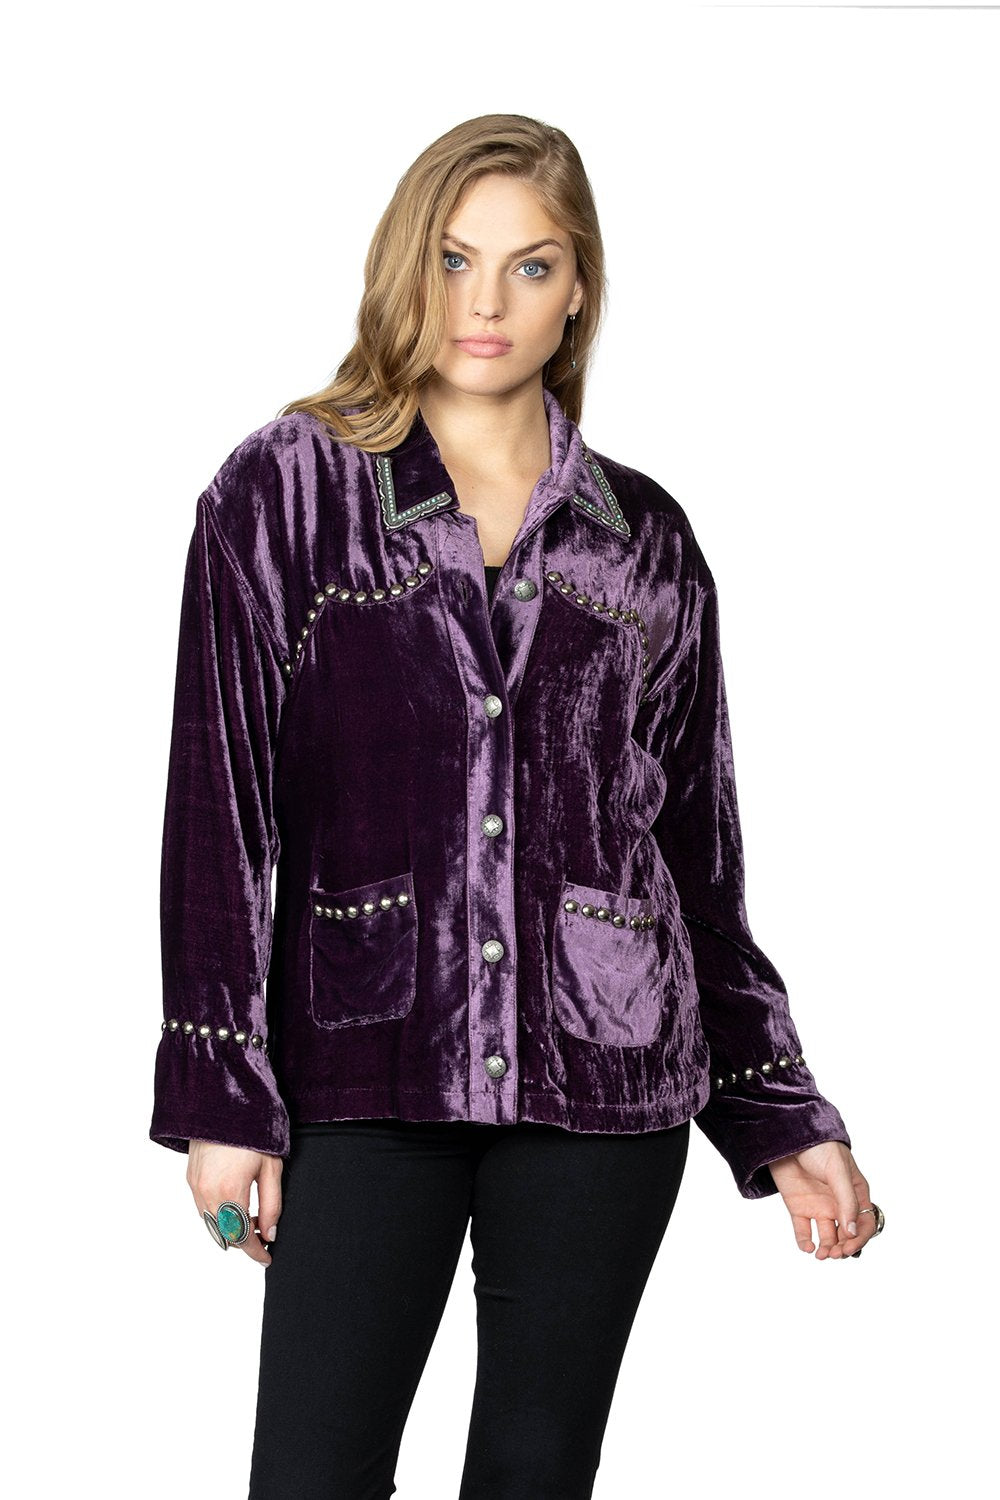 Double D Ranch Velvet Blackhills Jacket in Pagent Purple 6Whiskey Cody Fall Collection 2020 C2718